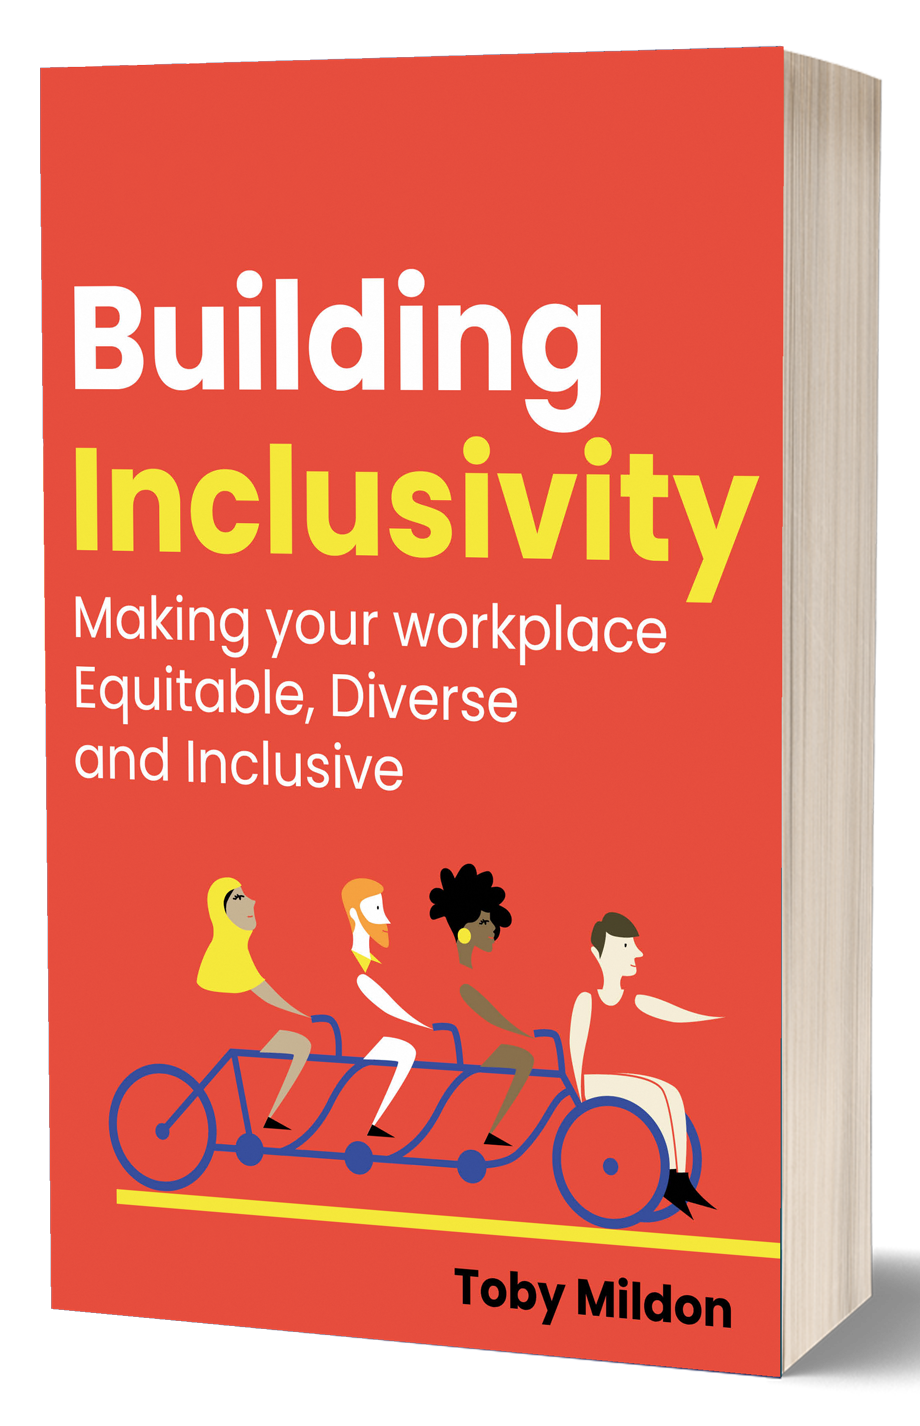 Front cover of Building Inclusivity book